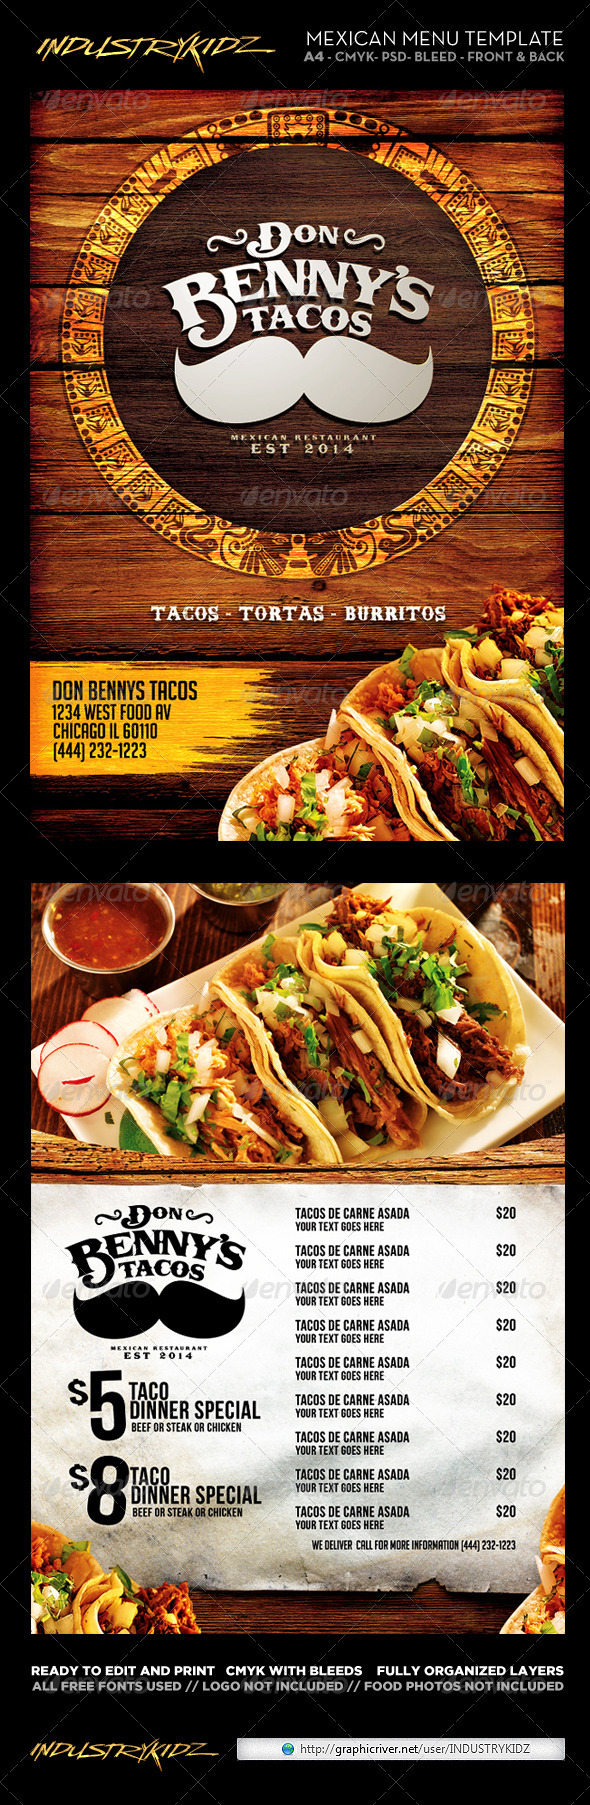 mexican-menu-template-by-industrykidz-graphicriver